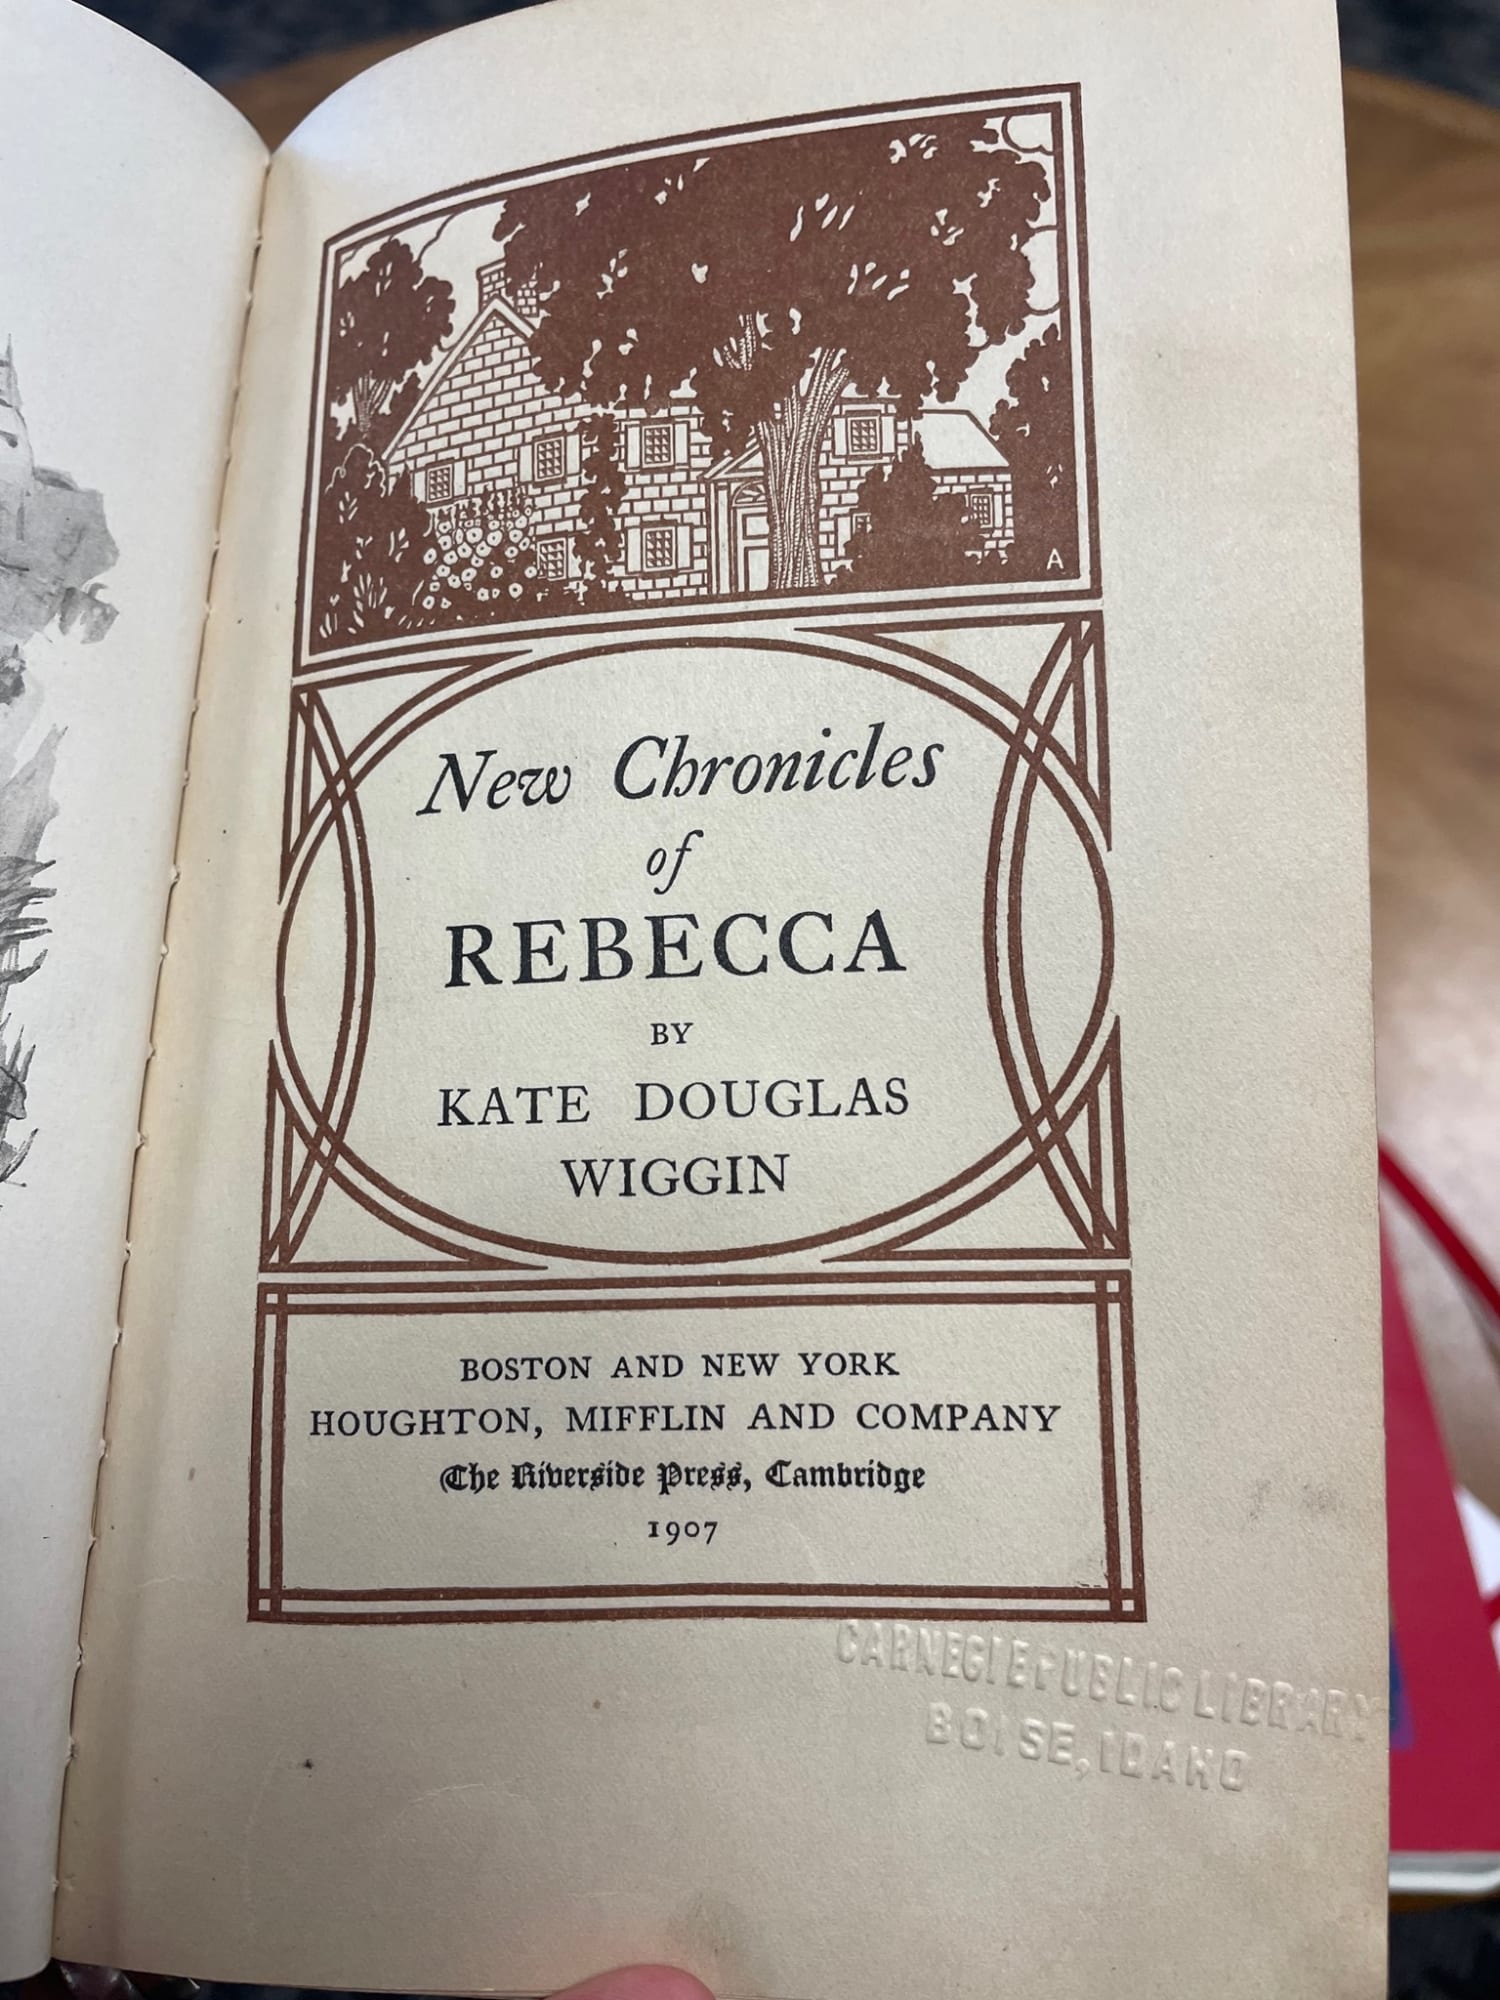 Overdue book returned anonymously to Idaho library 111 years later